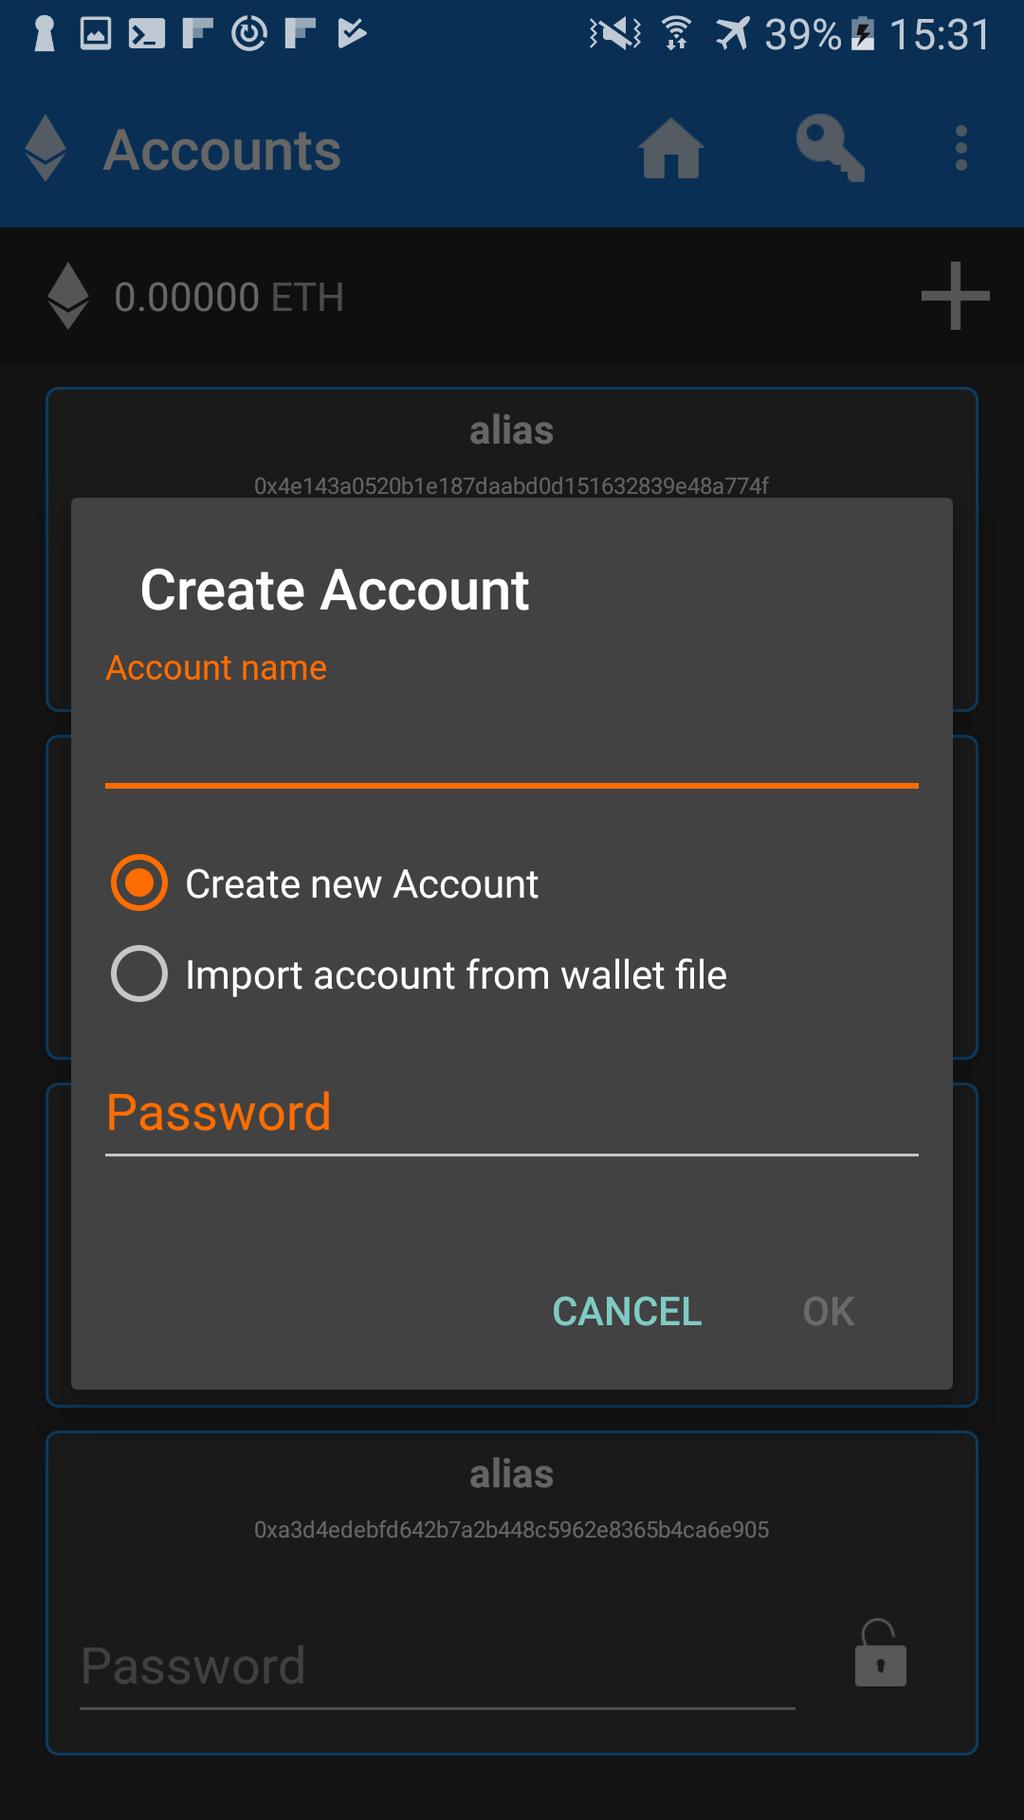 The AccountActivity also provides the AccountDialogFragment (2) to create new accounts or to import existing accounts from a wallet file on the file system.